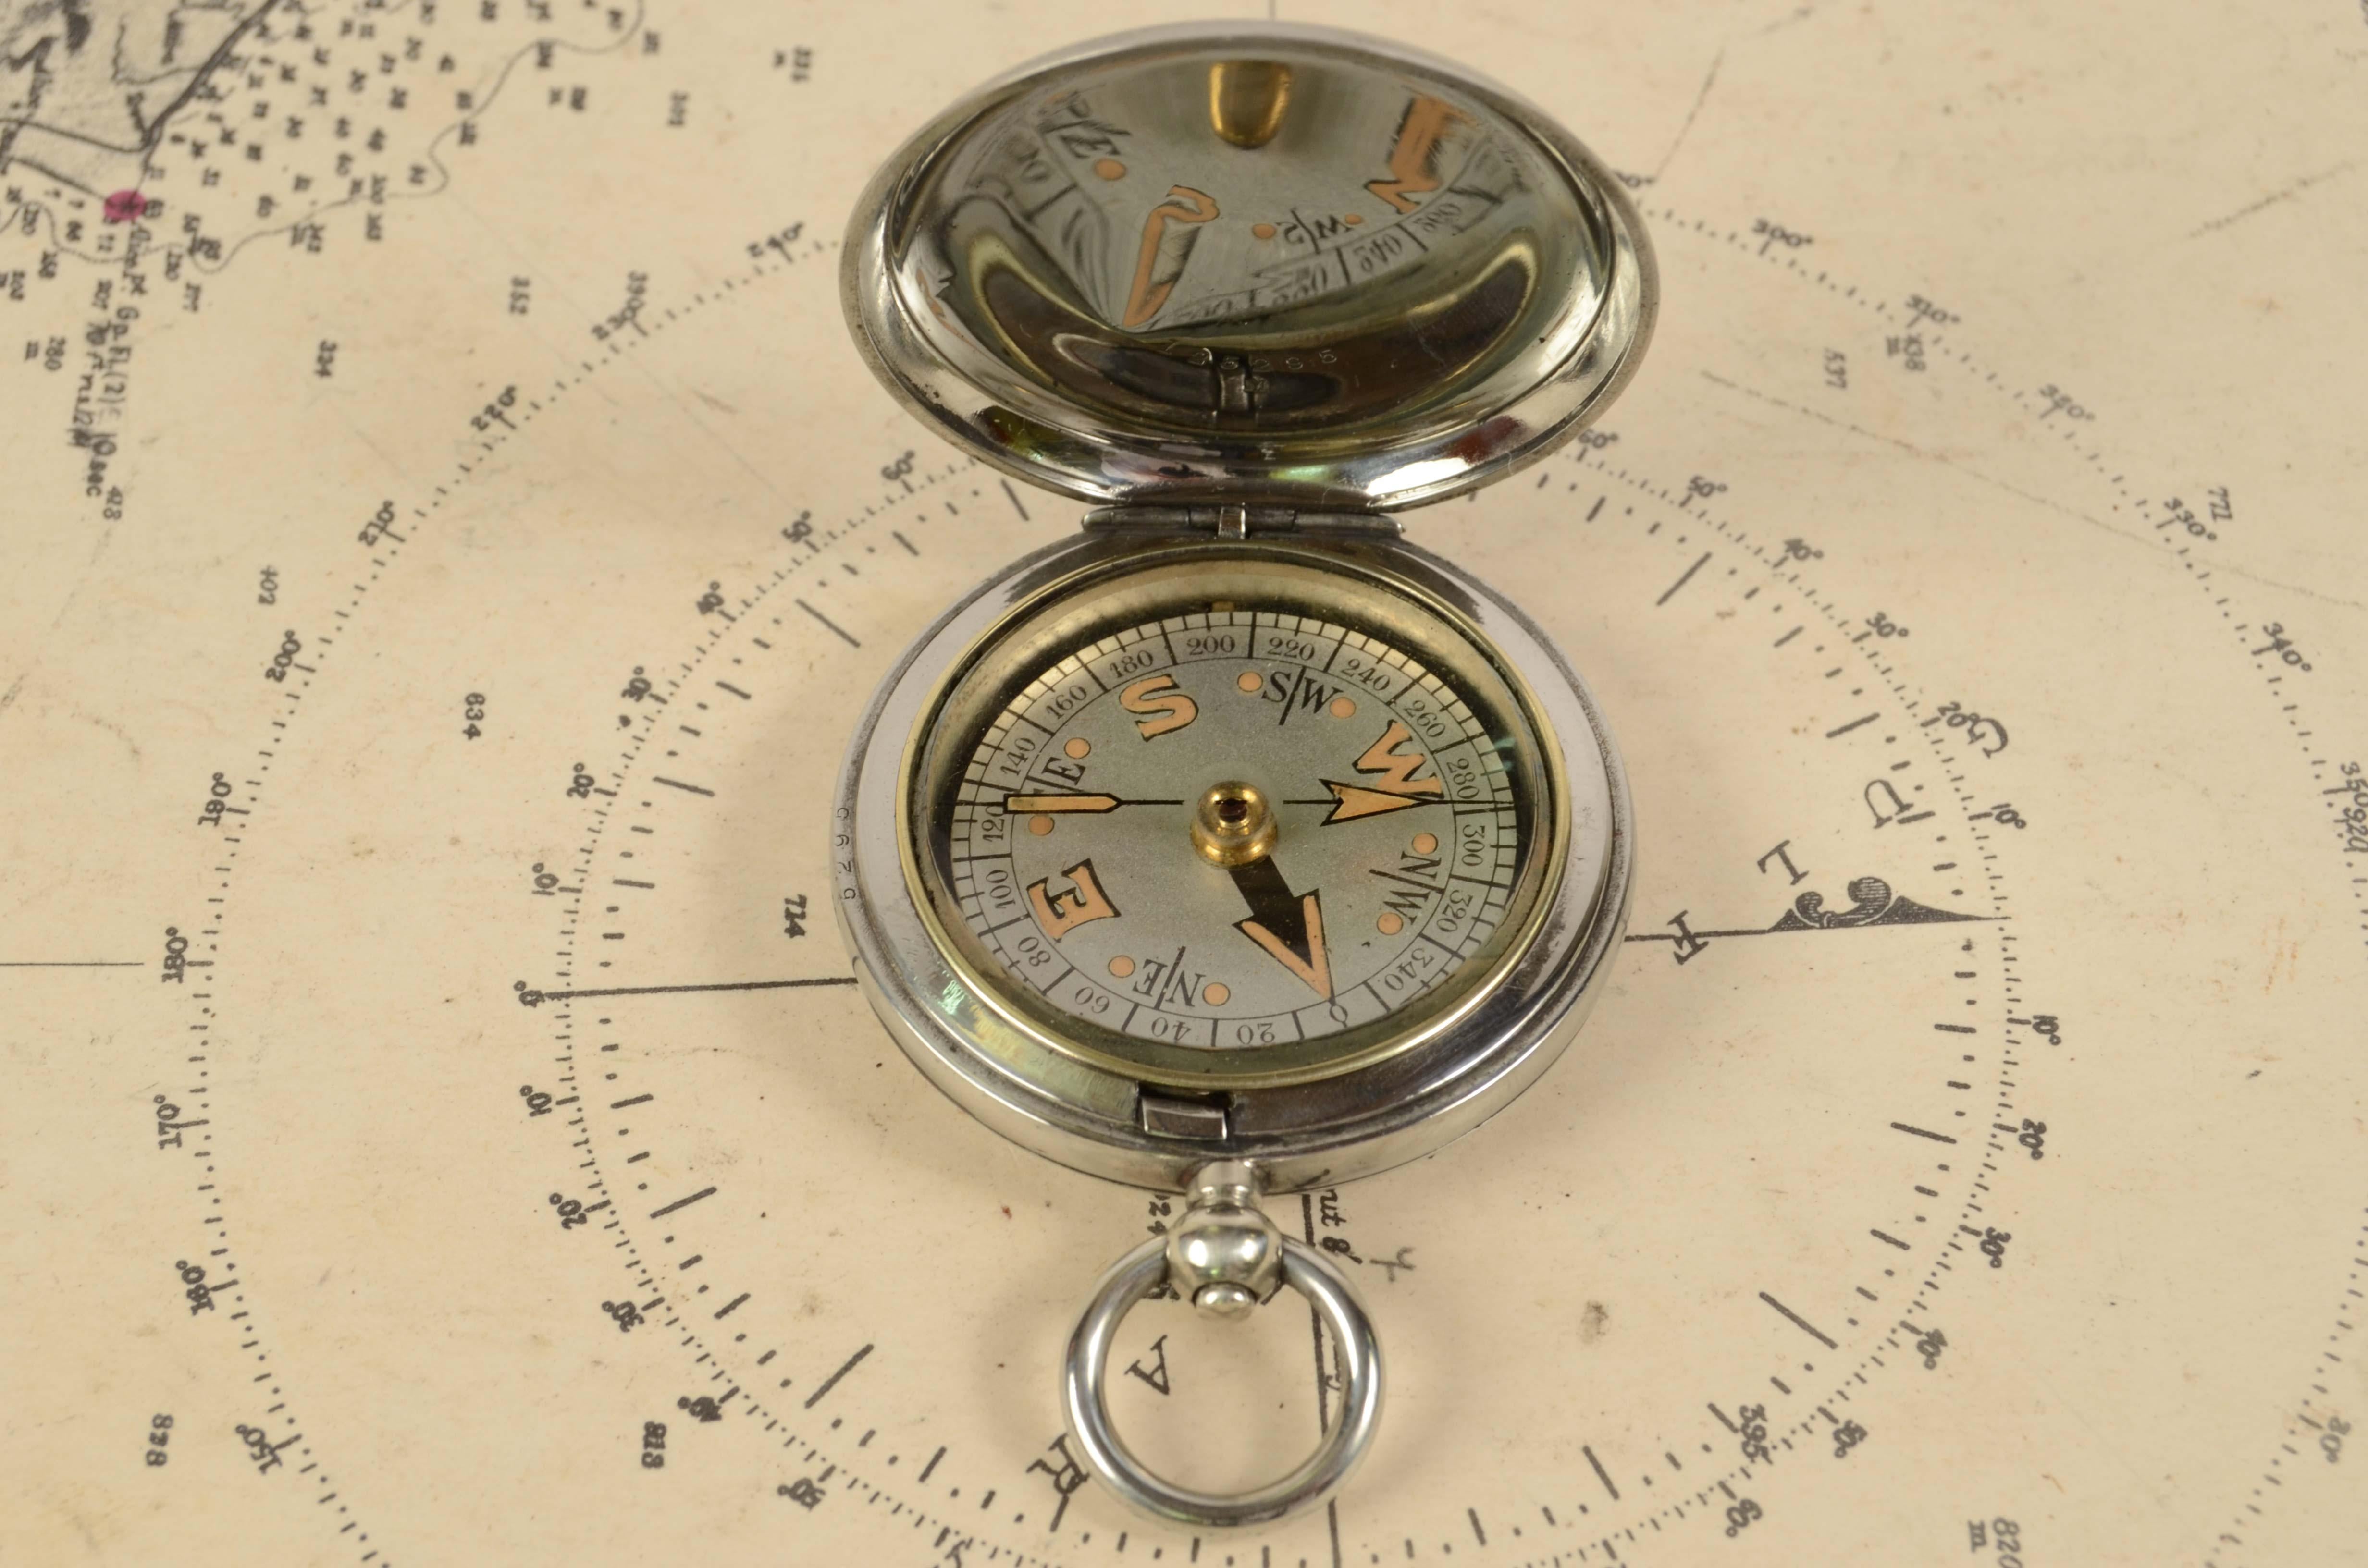 Pocket compass used by British aviation officers of chromed brass in the shape of a pocket watch, signed Dennison Birmingham VI 141115 from 1917. The compass has a snap-lock lid with release button inside the ring . Four-winds compass card complete